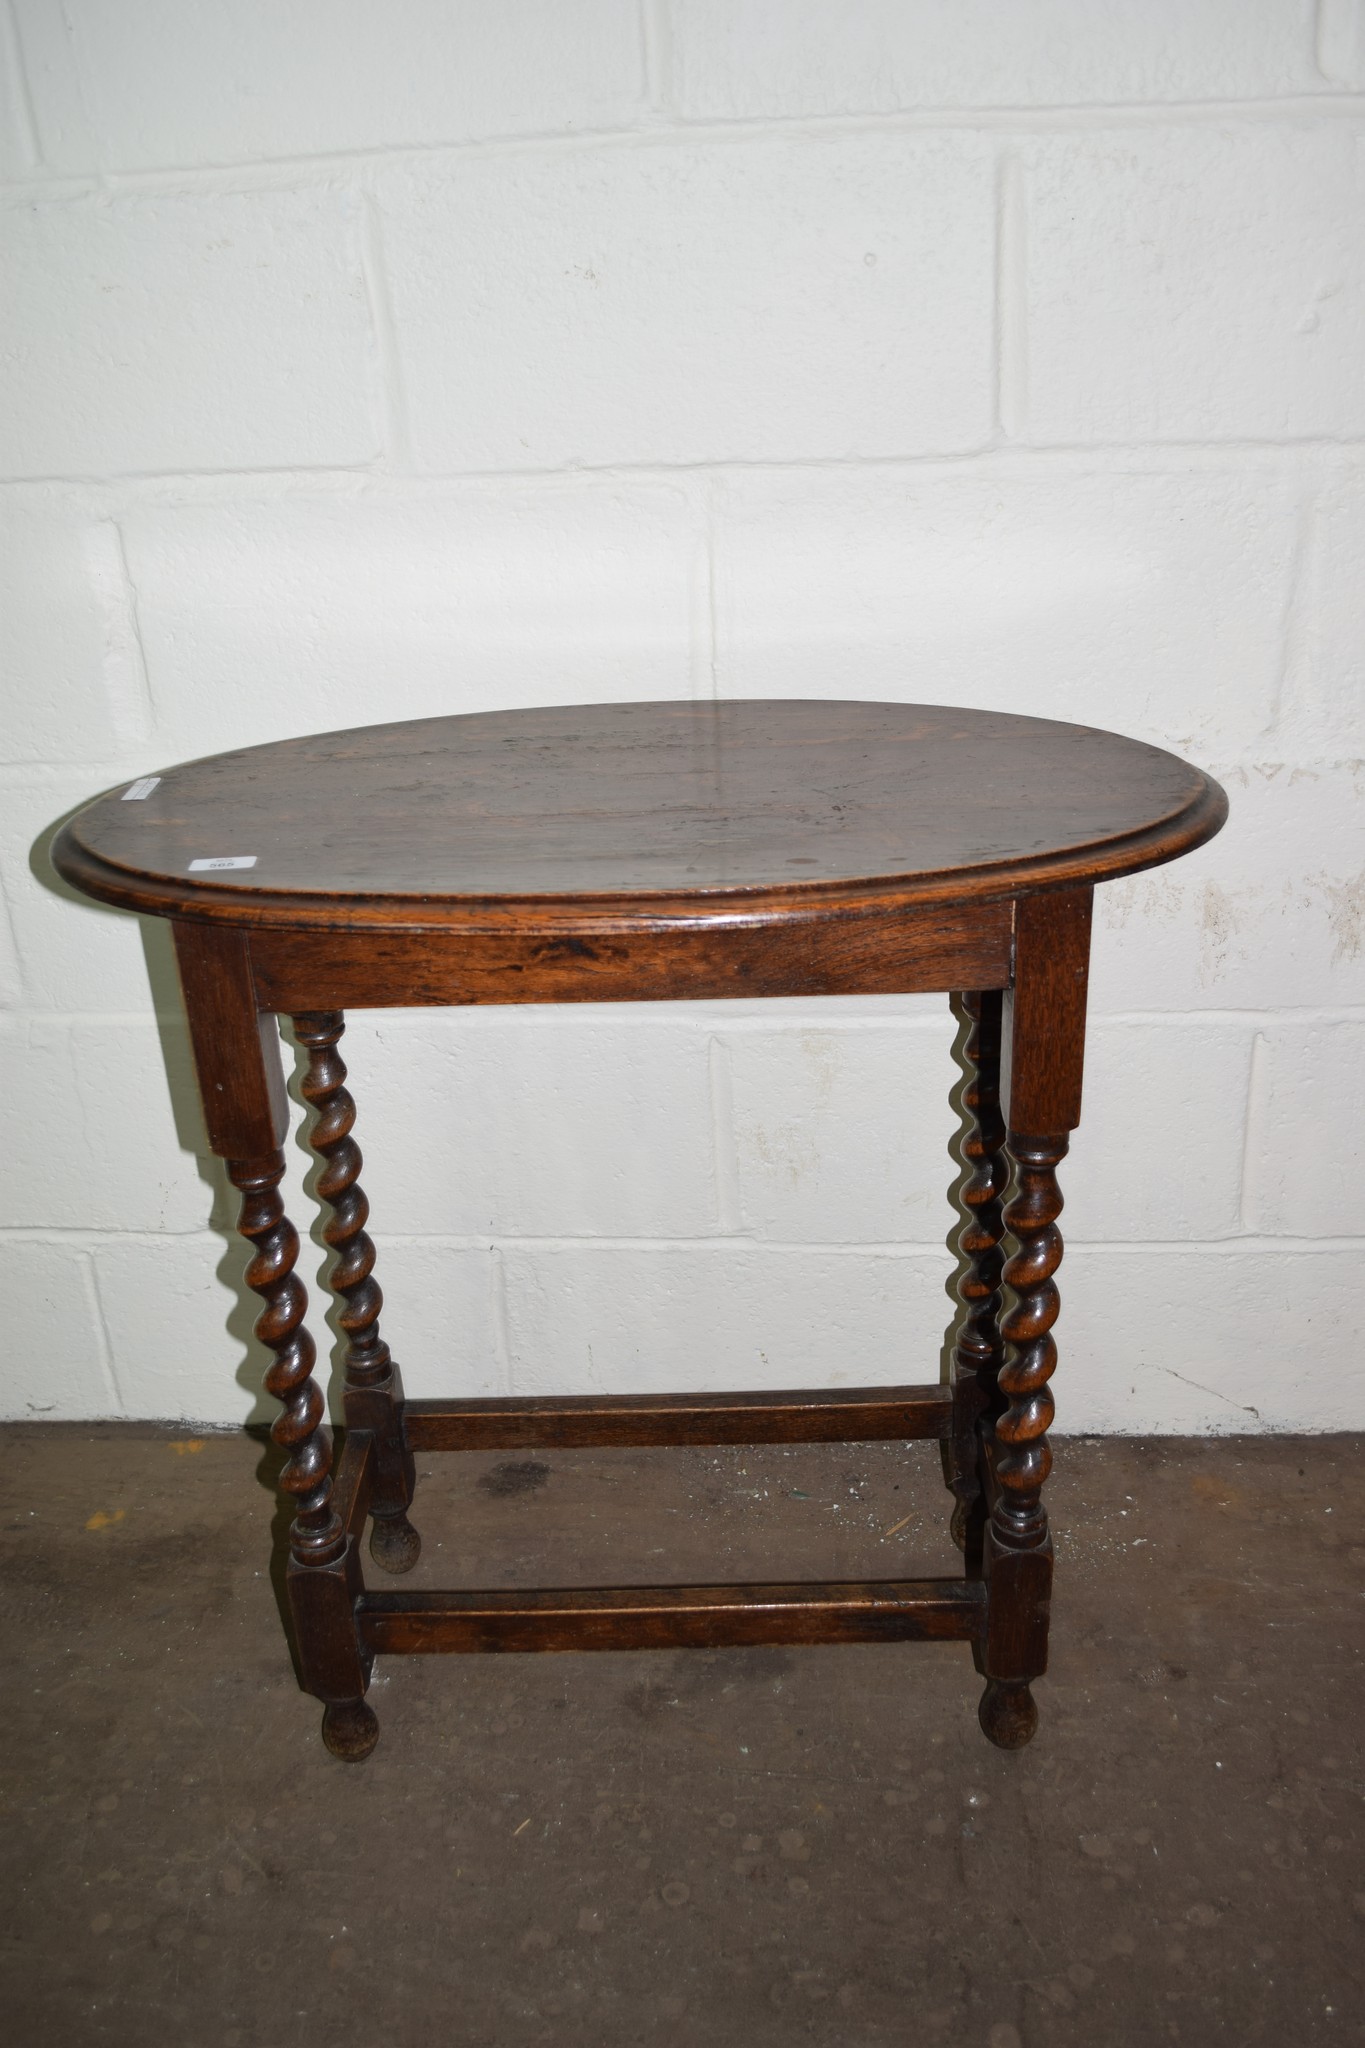 OVAL OAK OCCASSIONAL TABLE WITH BARLEY TWIST LEGS APPROX 75 X 45CM TOGETHER WITH VINTAGE PINE WALL